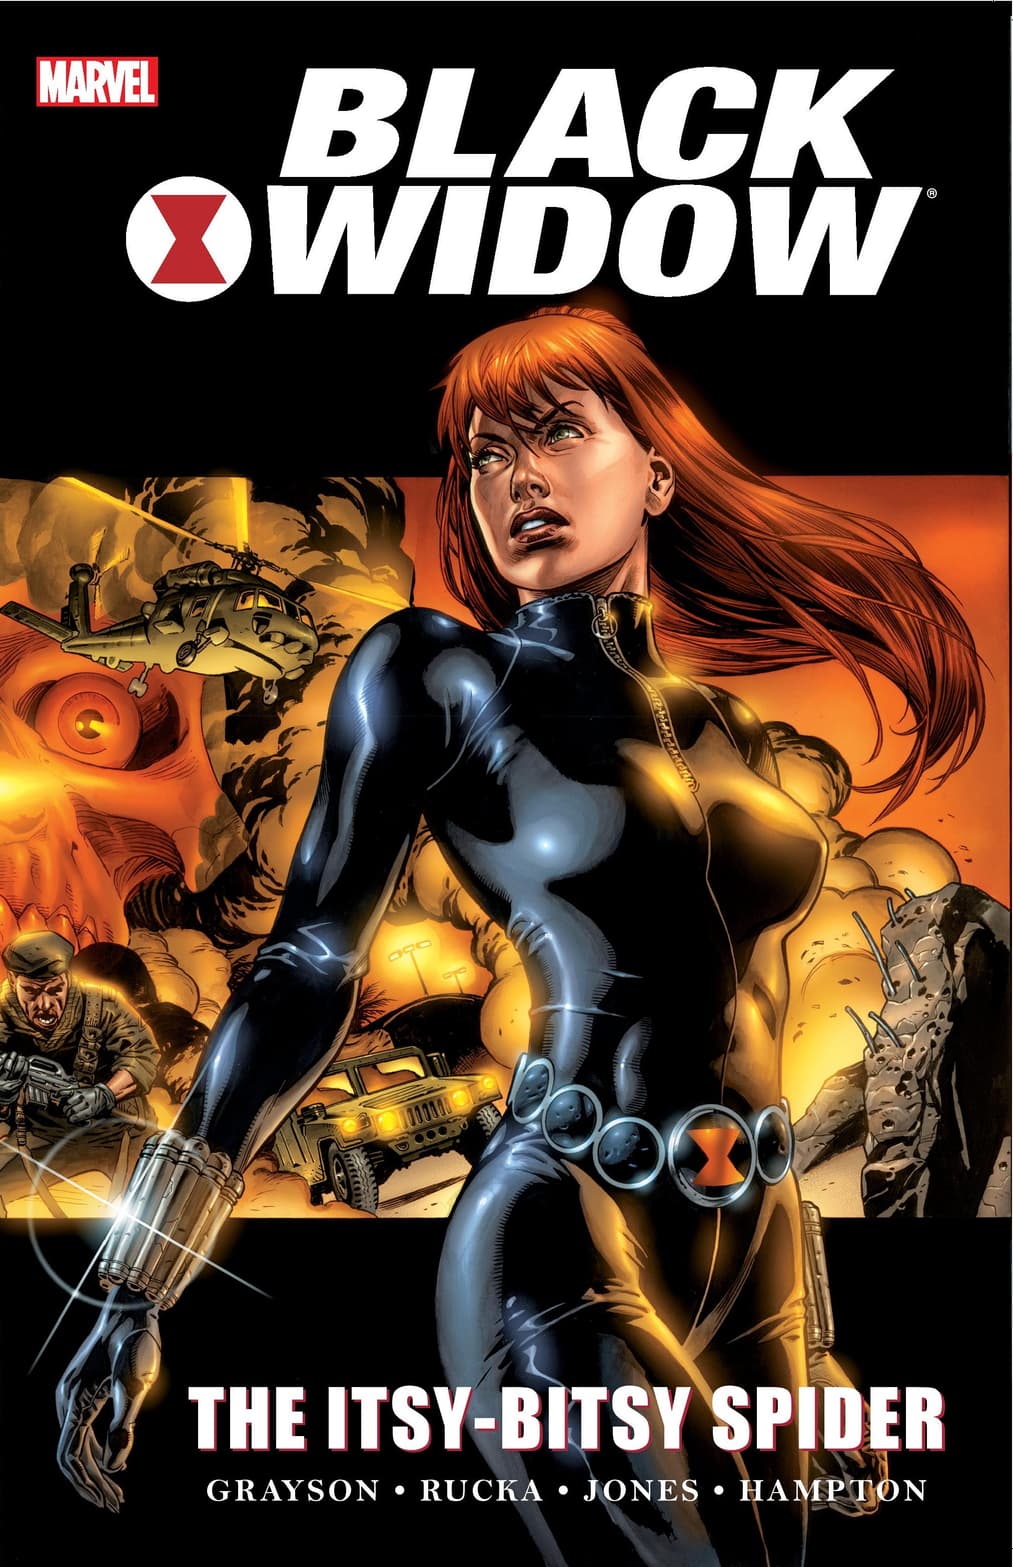 Cover to BLACK WIDOW: THE ITSY-BITSY SPIDER.